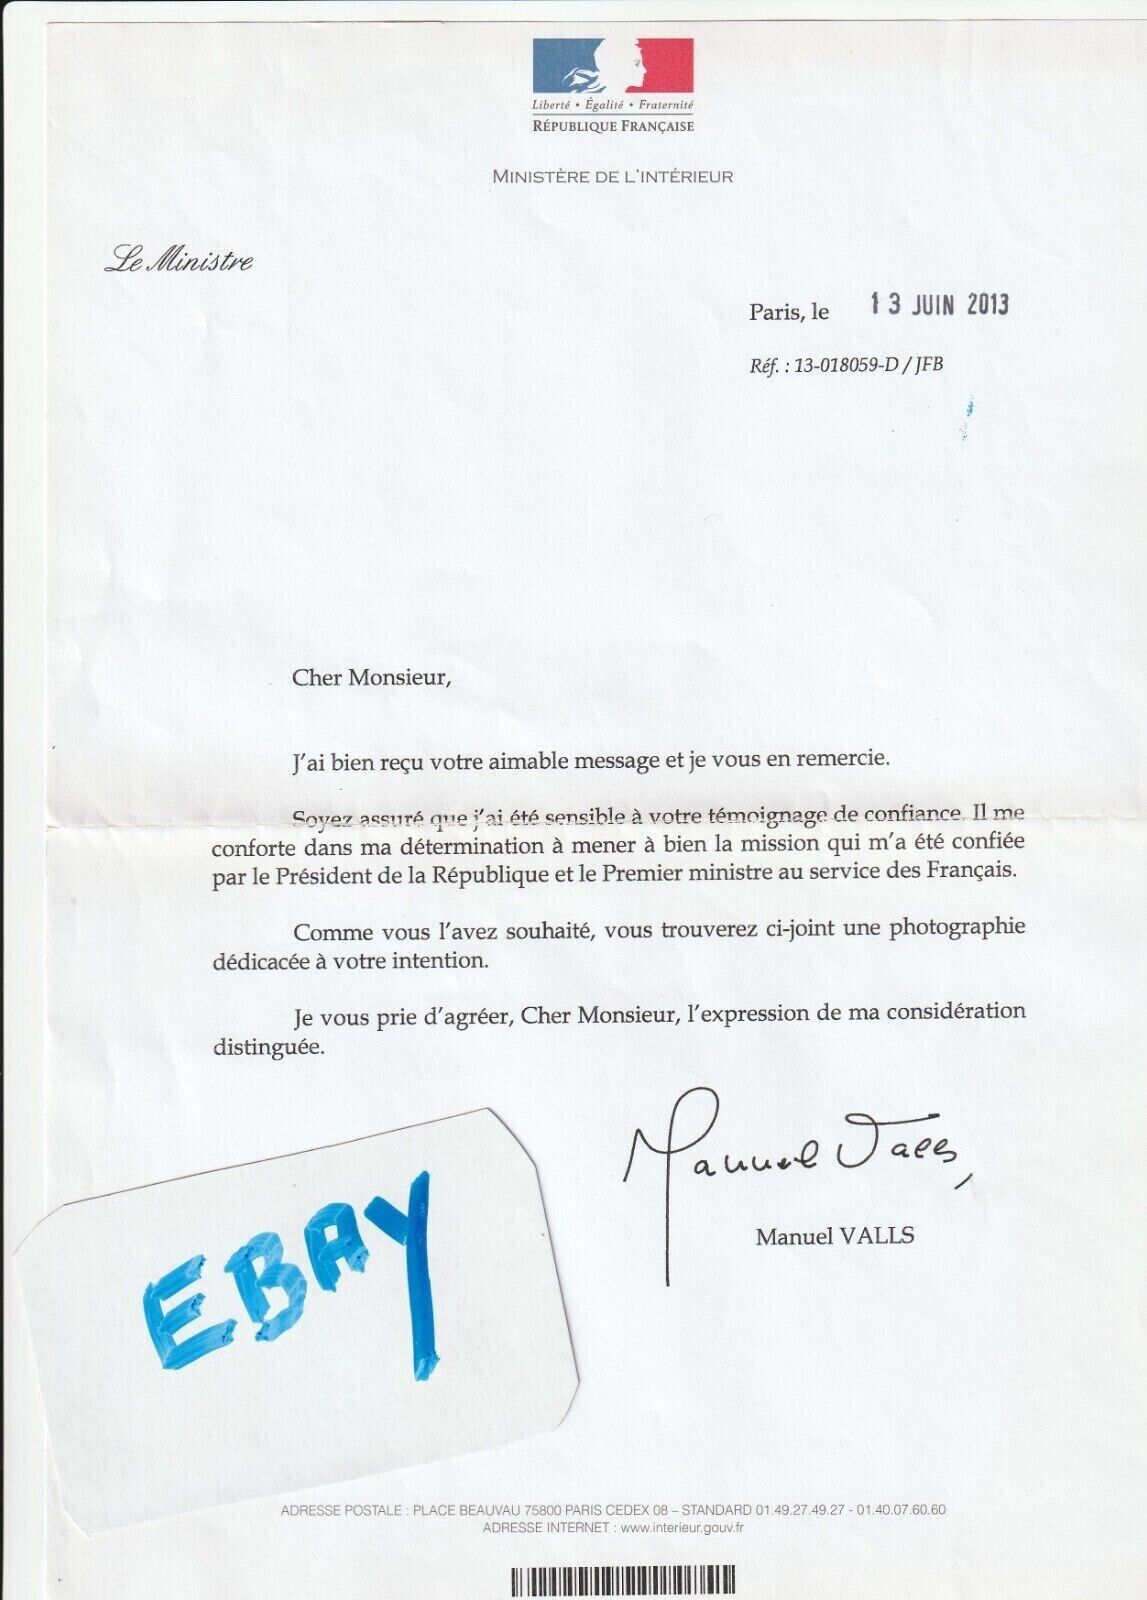 Mr. VALLS MANUAL: former Minister of the Interior - Original Autograph - Authentic.